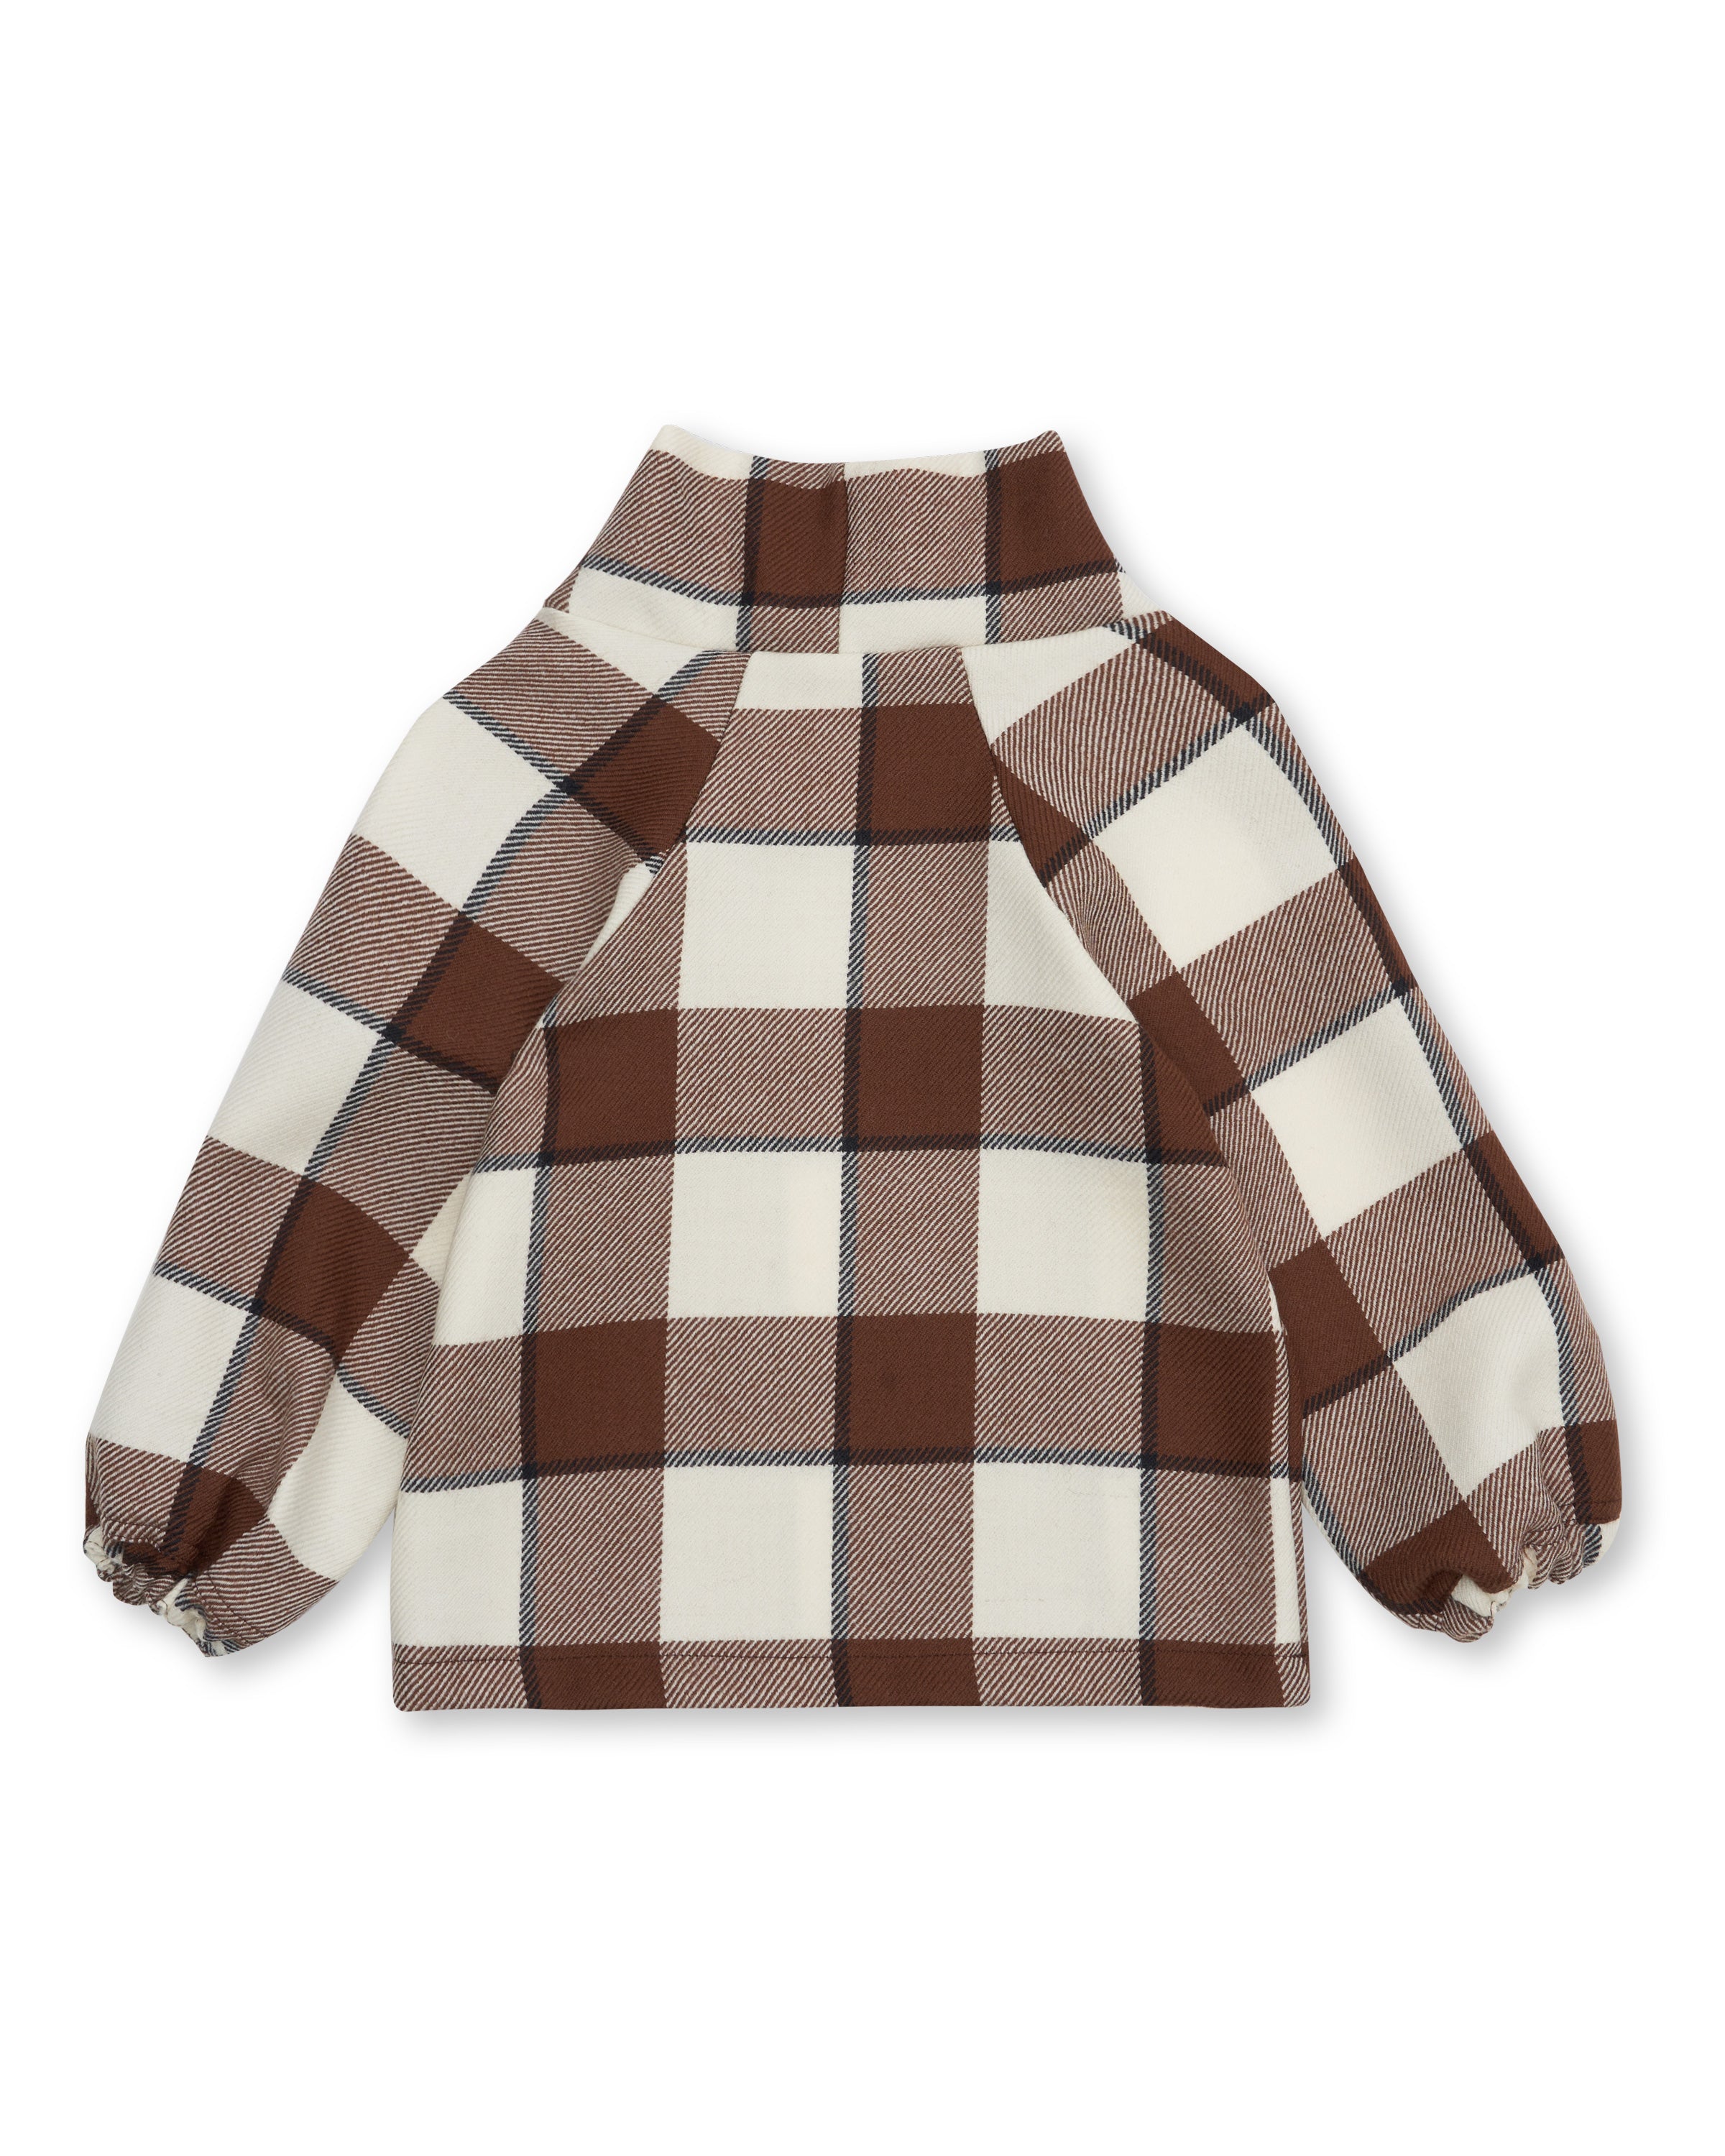 Boys' Designer Jumper, 100% Wool, Brown Check, ages 1 to 6.